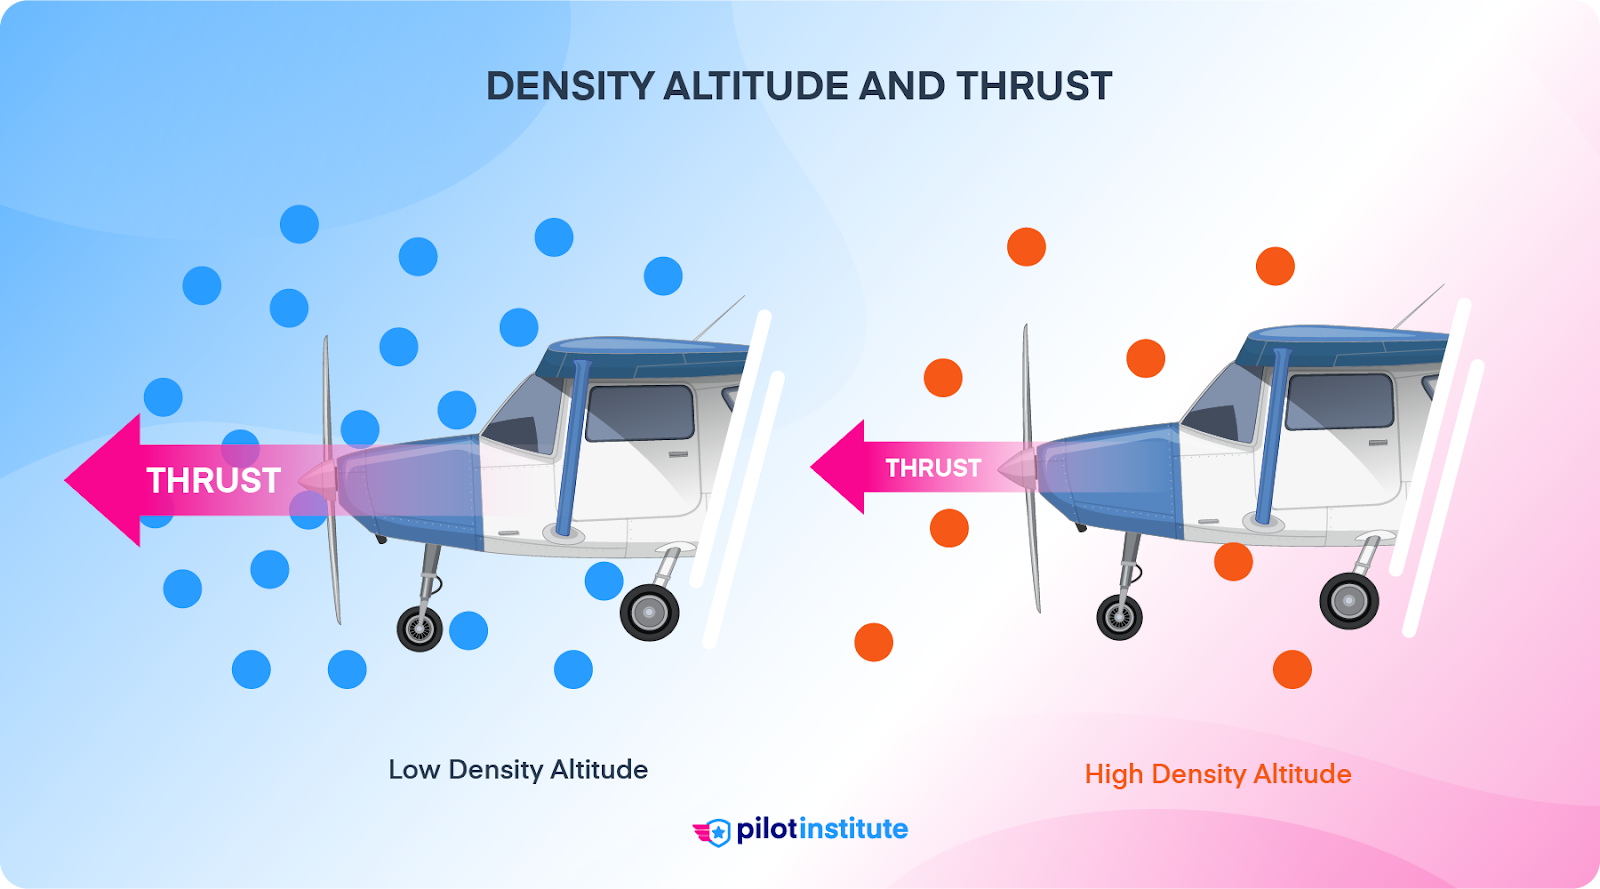 Two propeller-driven airplanes showing how increased density altitude decreases thrust.